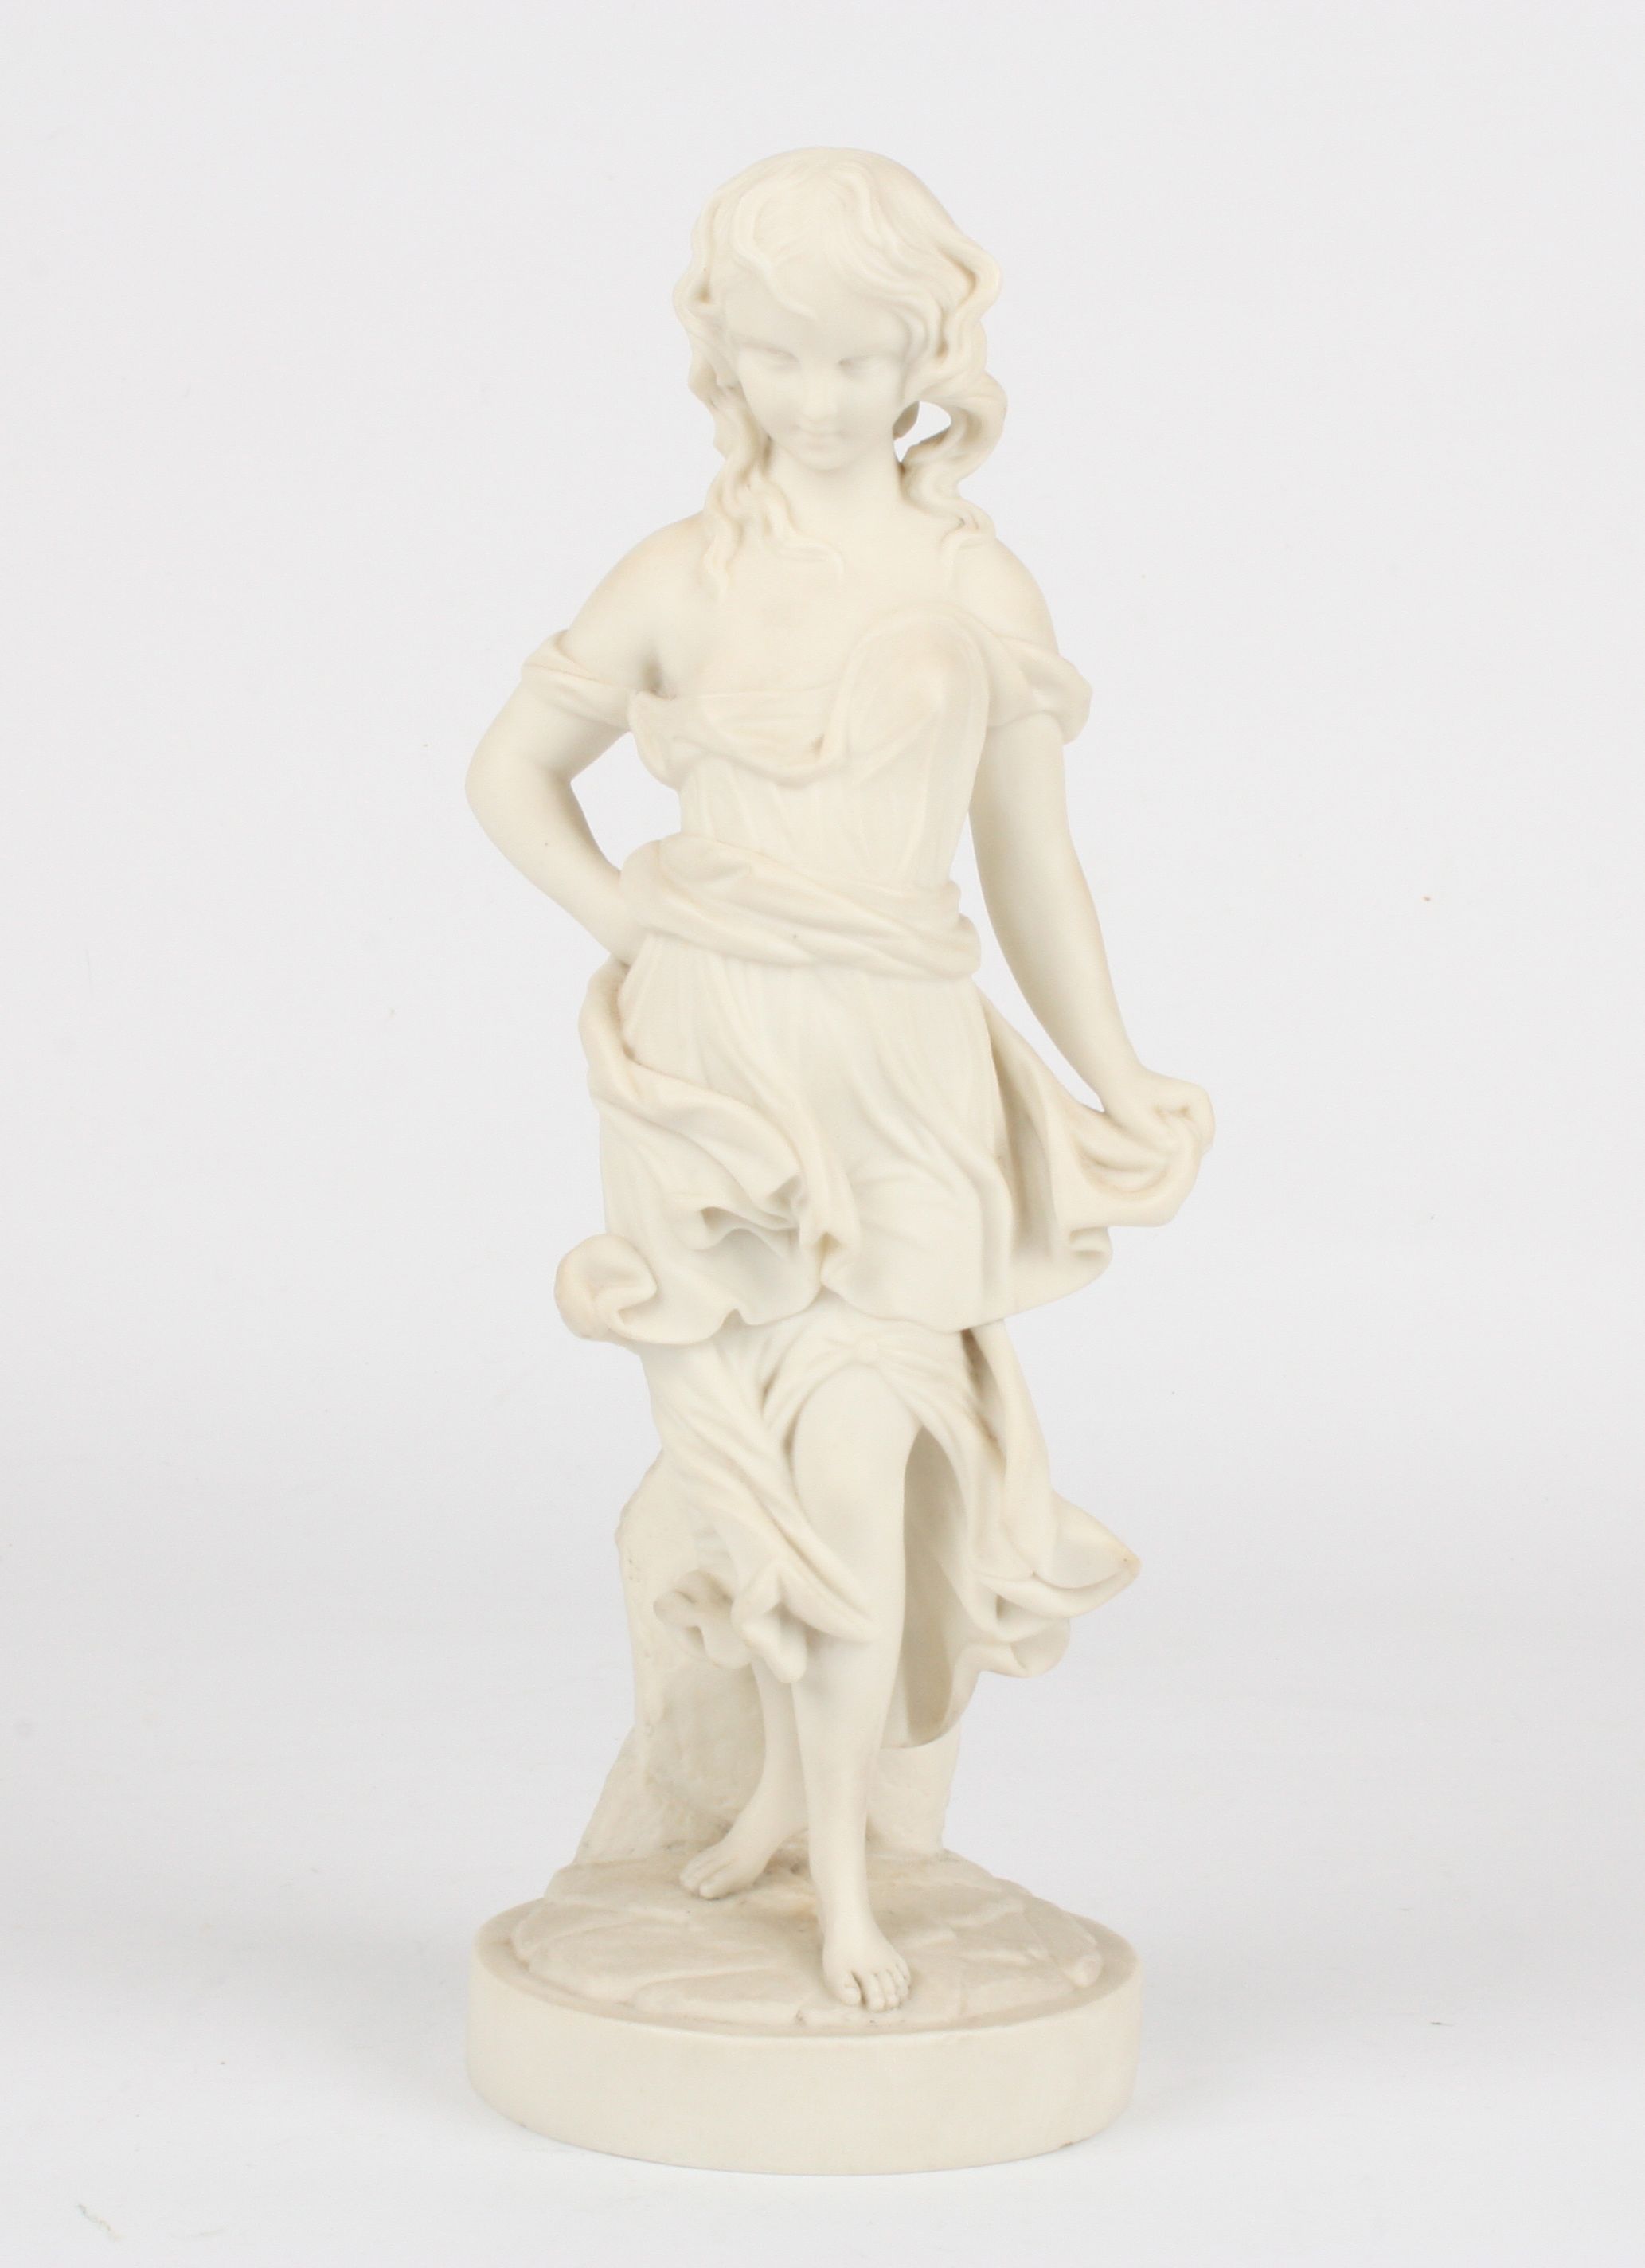 A Victorian style Parian figure of a young girl
stood wearing a flowing robe and supported on a